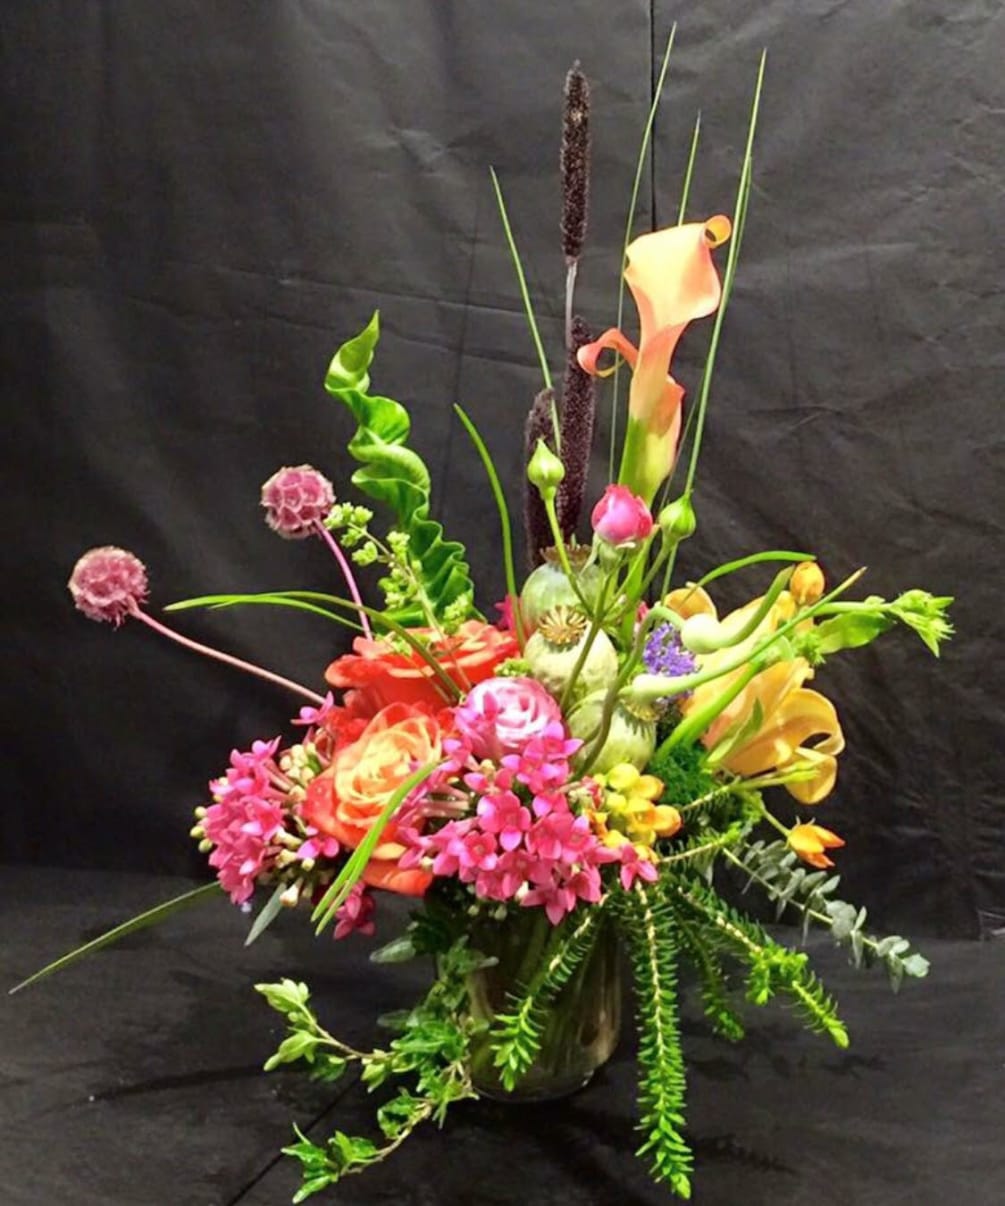 Arrangement of pinks, greens, and yellows.